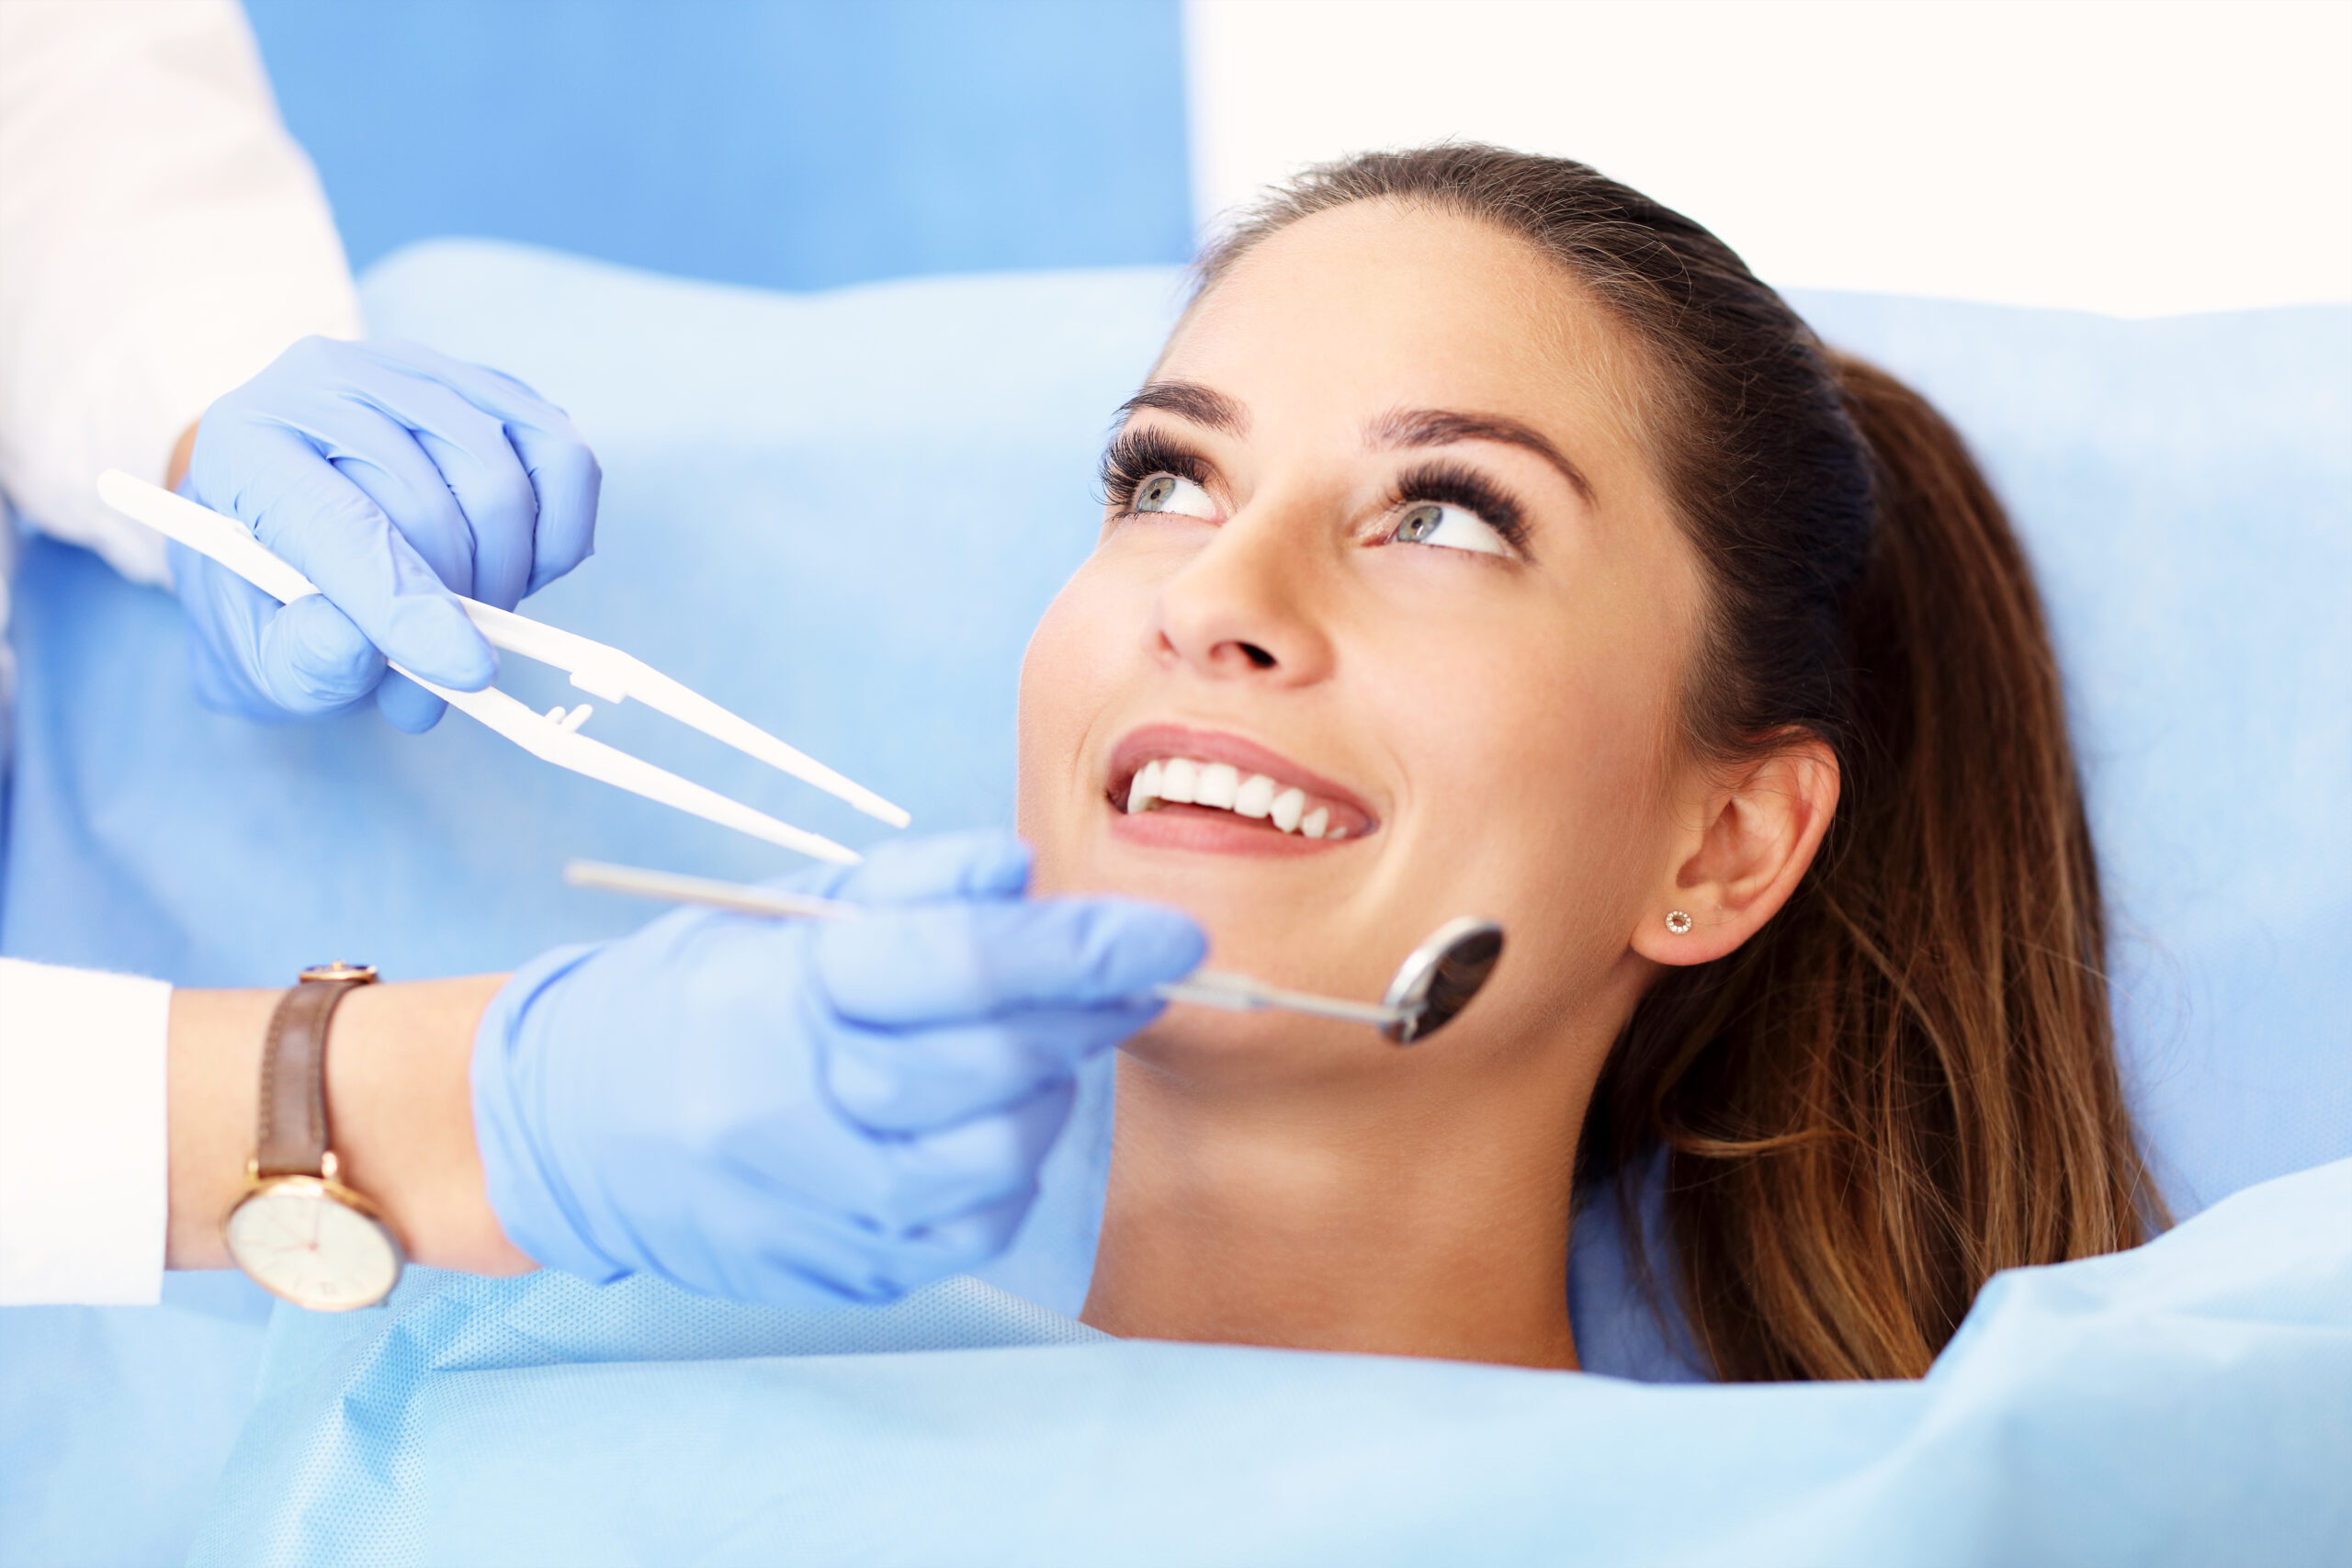 How Long Does a Root Canal Take To Heal After Treatment?